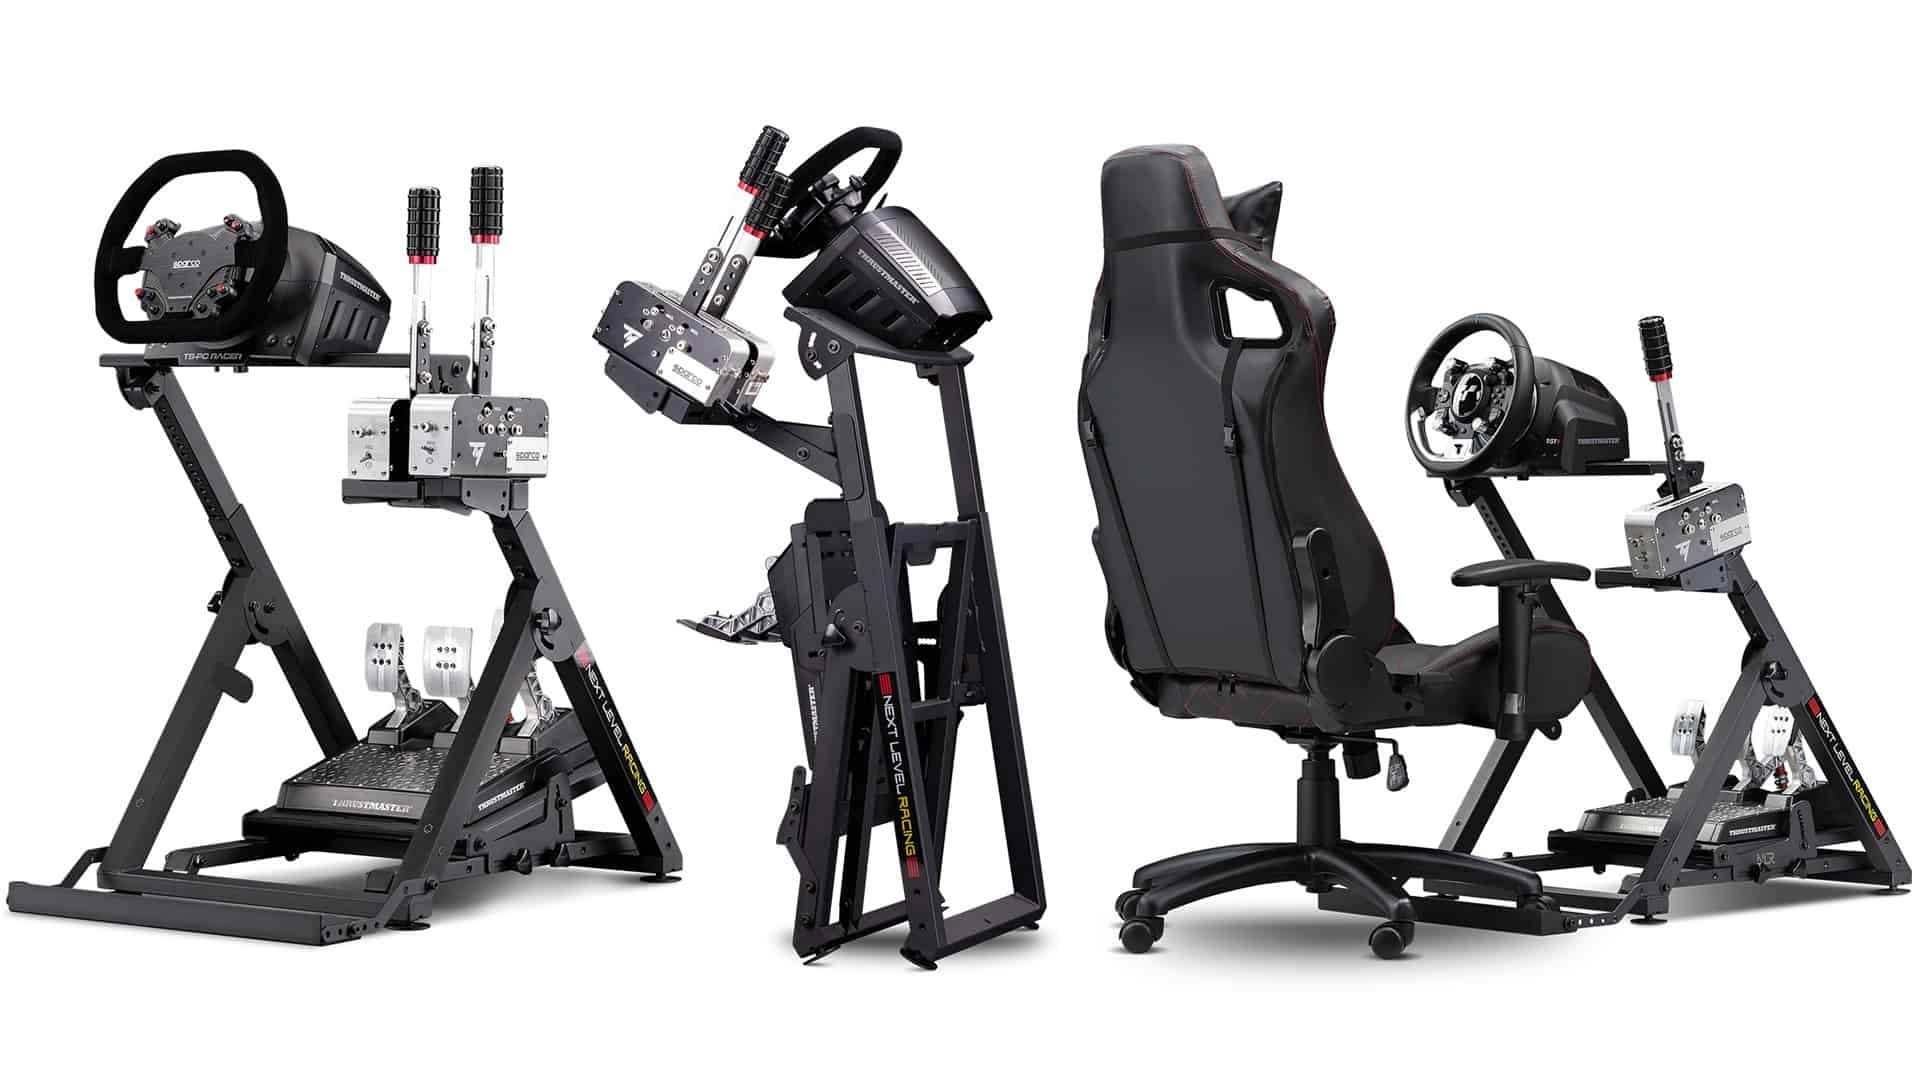 Next Level Racing Wheel Stand 2.0 announced